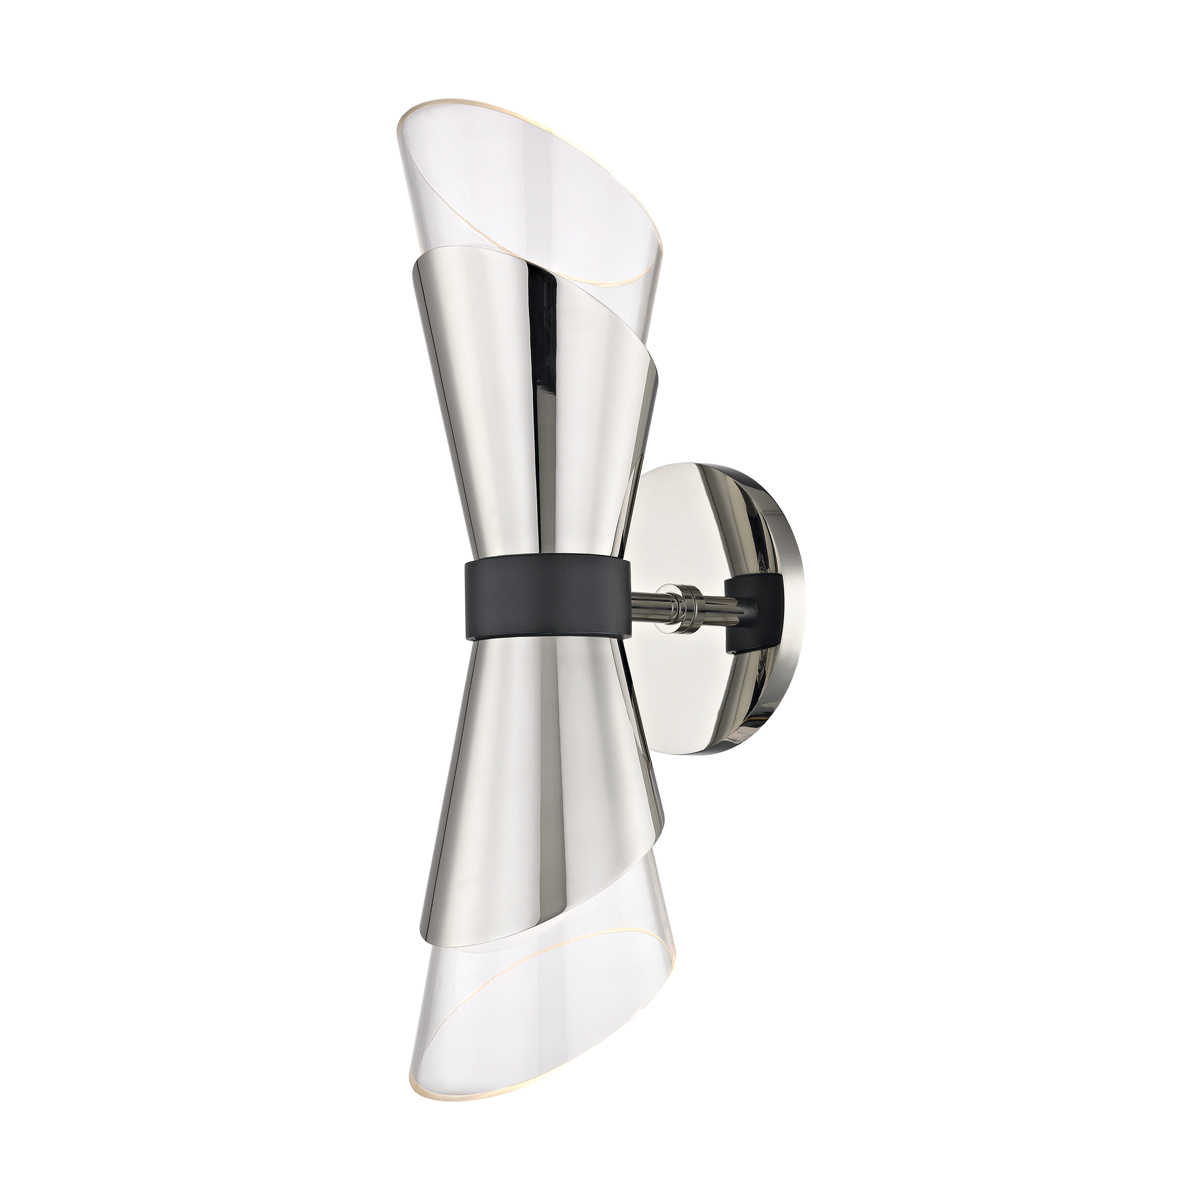 ANGIE Wall Sconce H130201-PN/BK-CE Hudson Valley Lighting